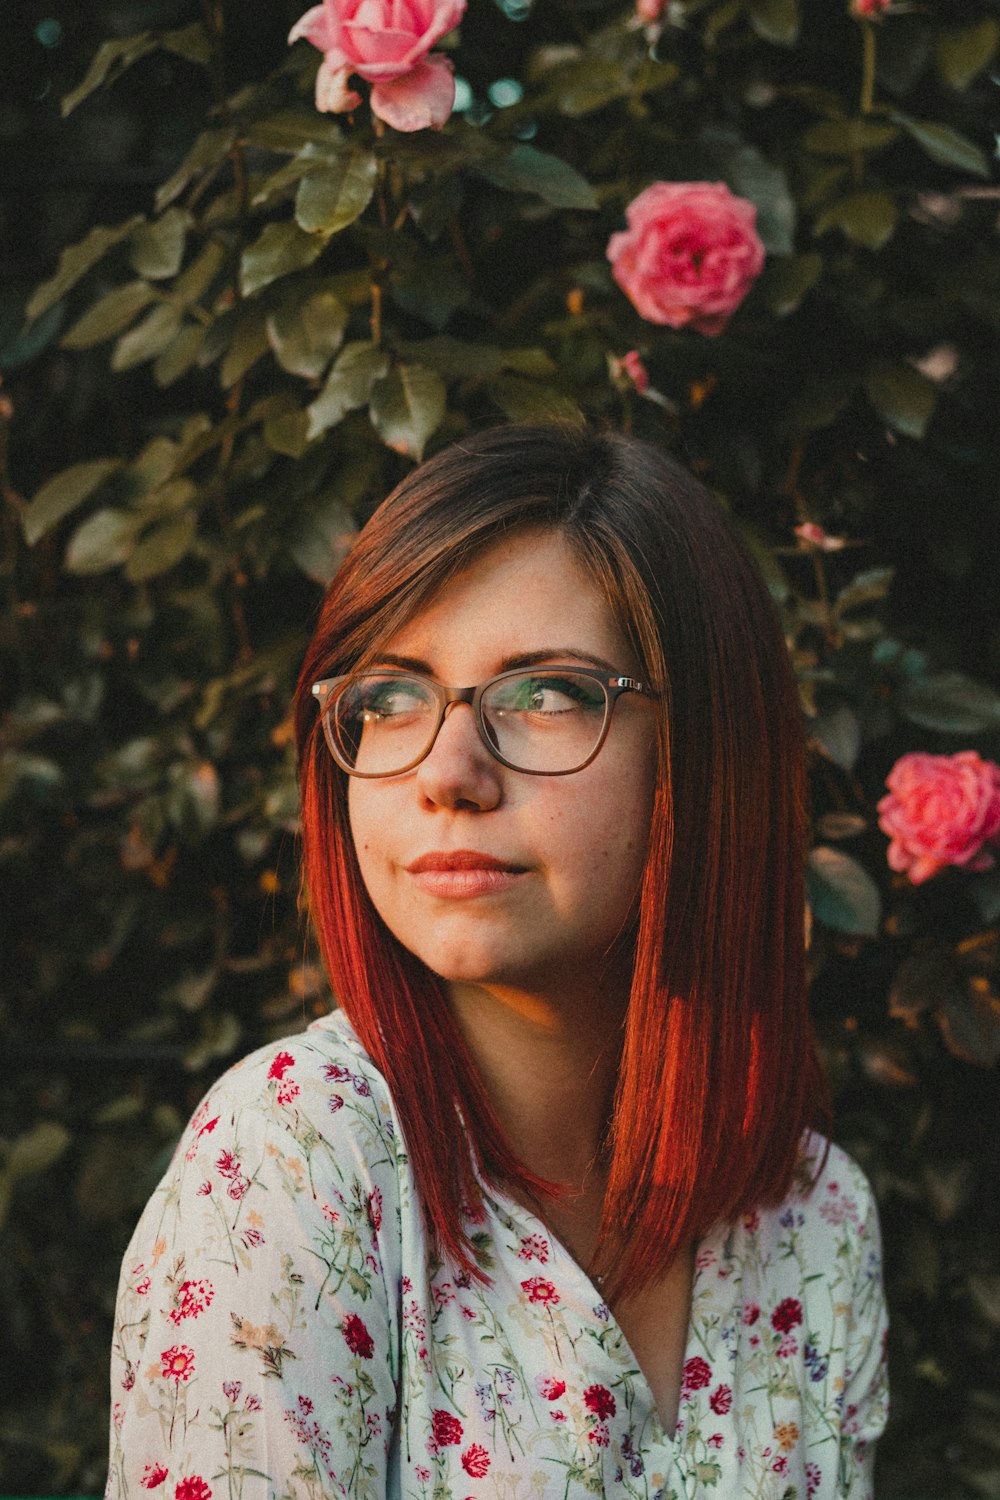 woman in white and pink floral shirt wearing eyeglasses